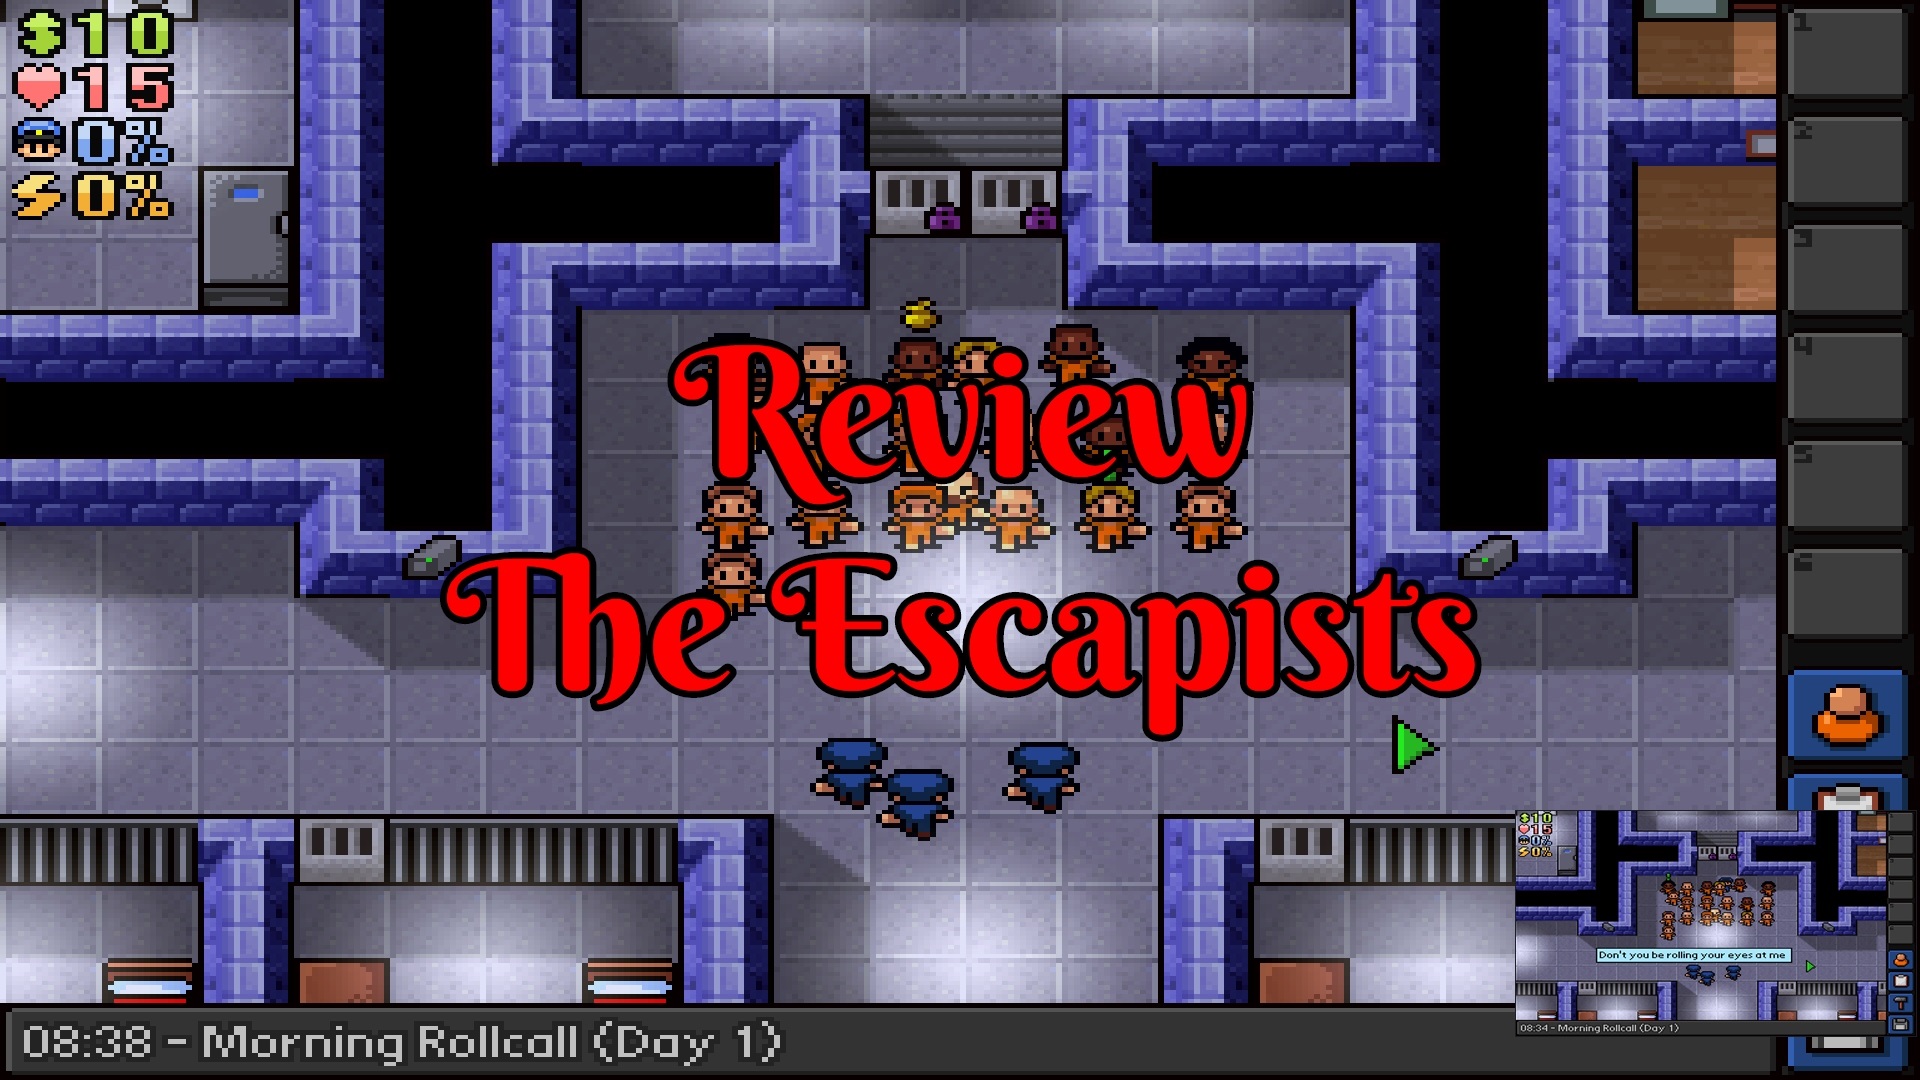 The Escapists game.jpg